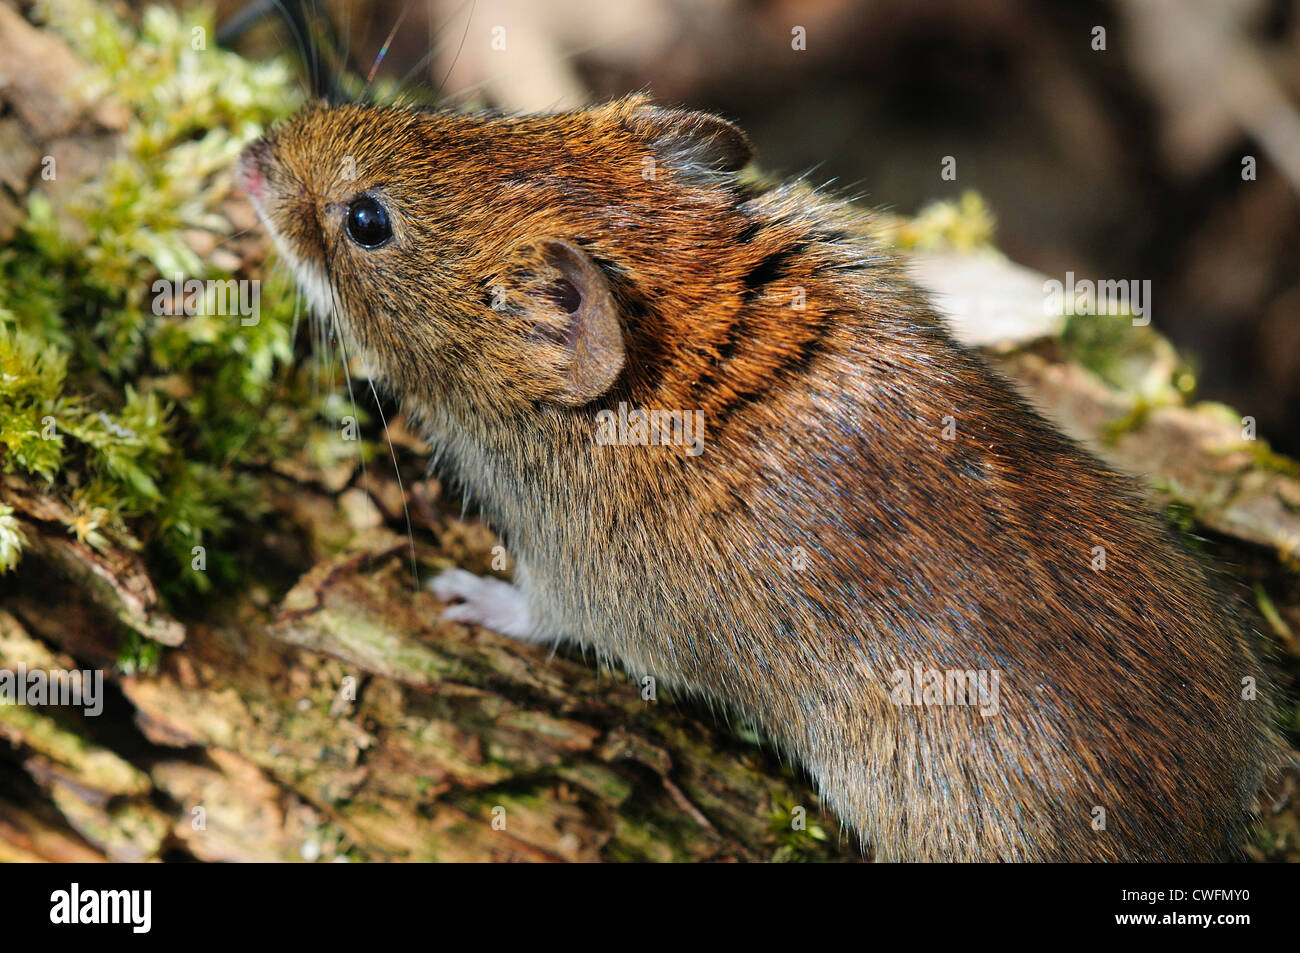 harvest mouse micromys minutes soricinus rodent mammal animal small Stock Photo